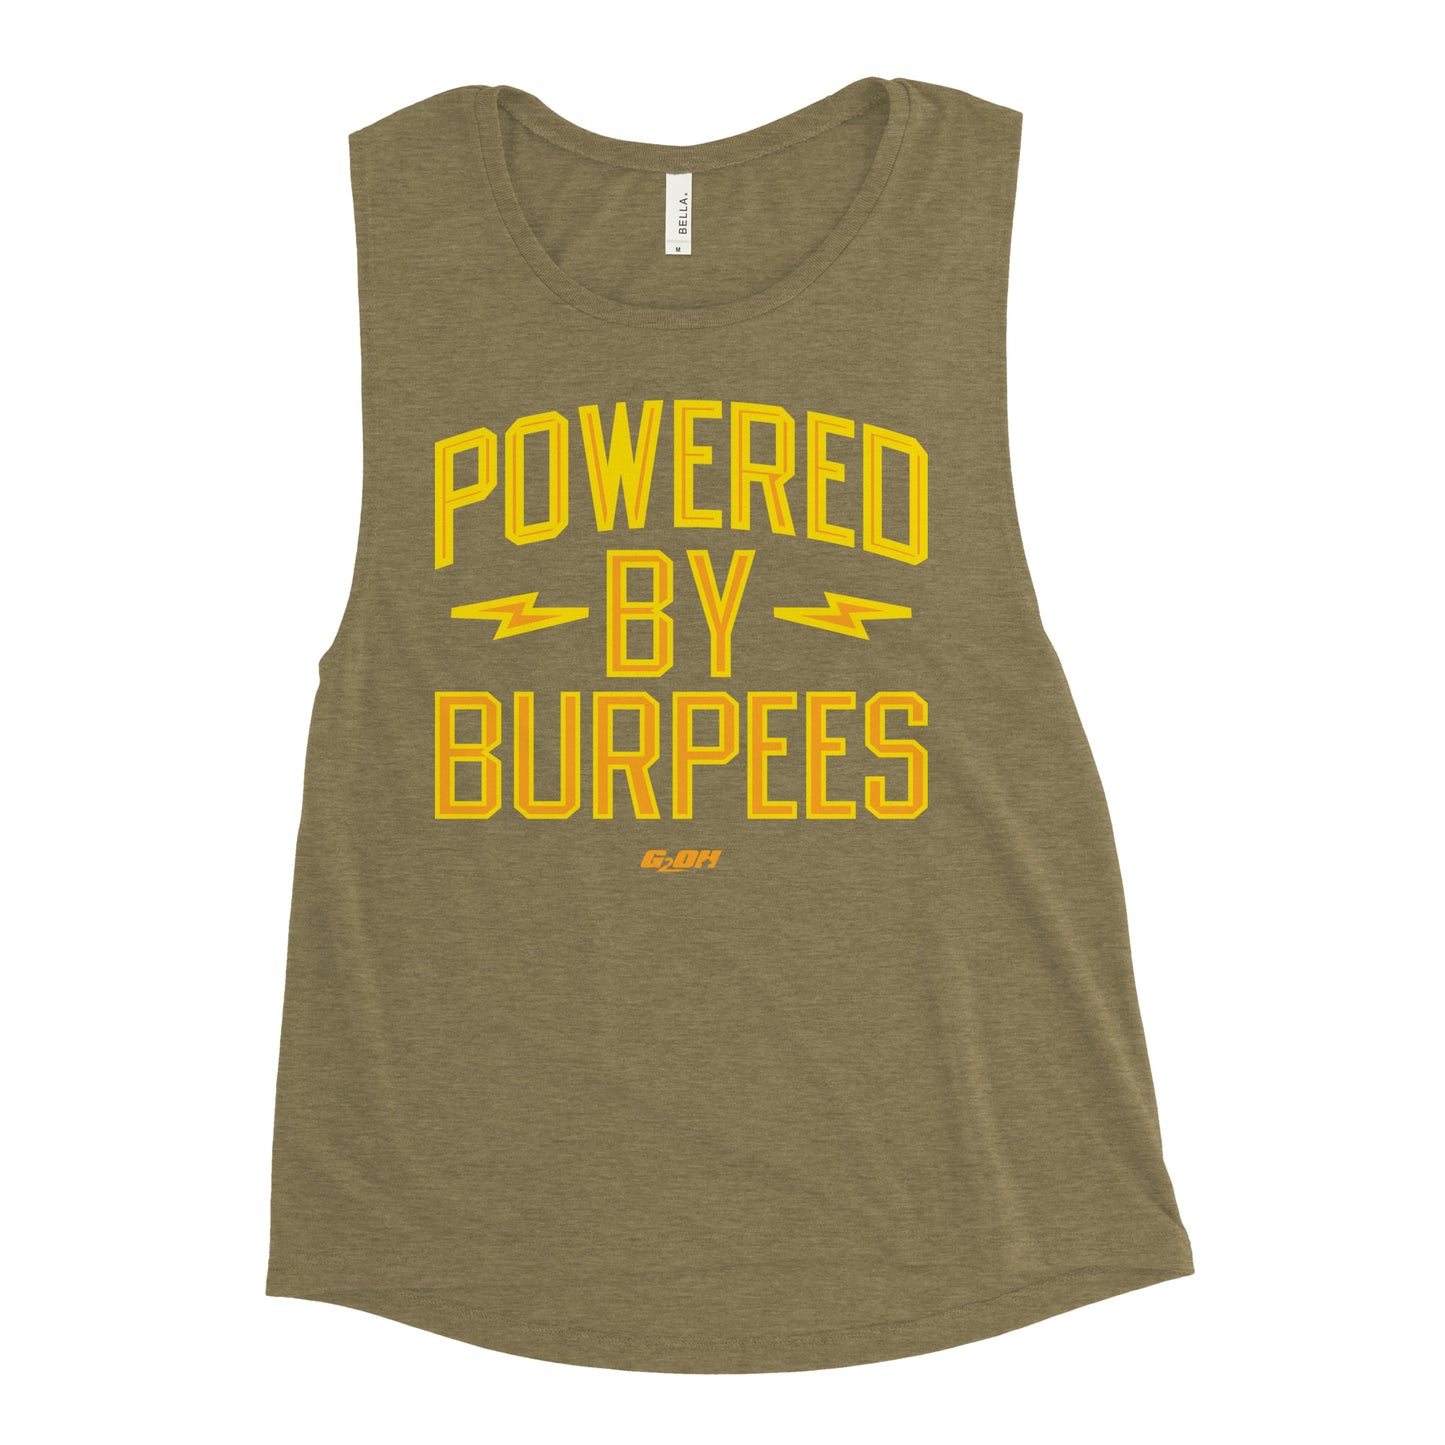 Powered By Burpees Women's Muscle Tank